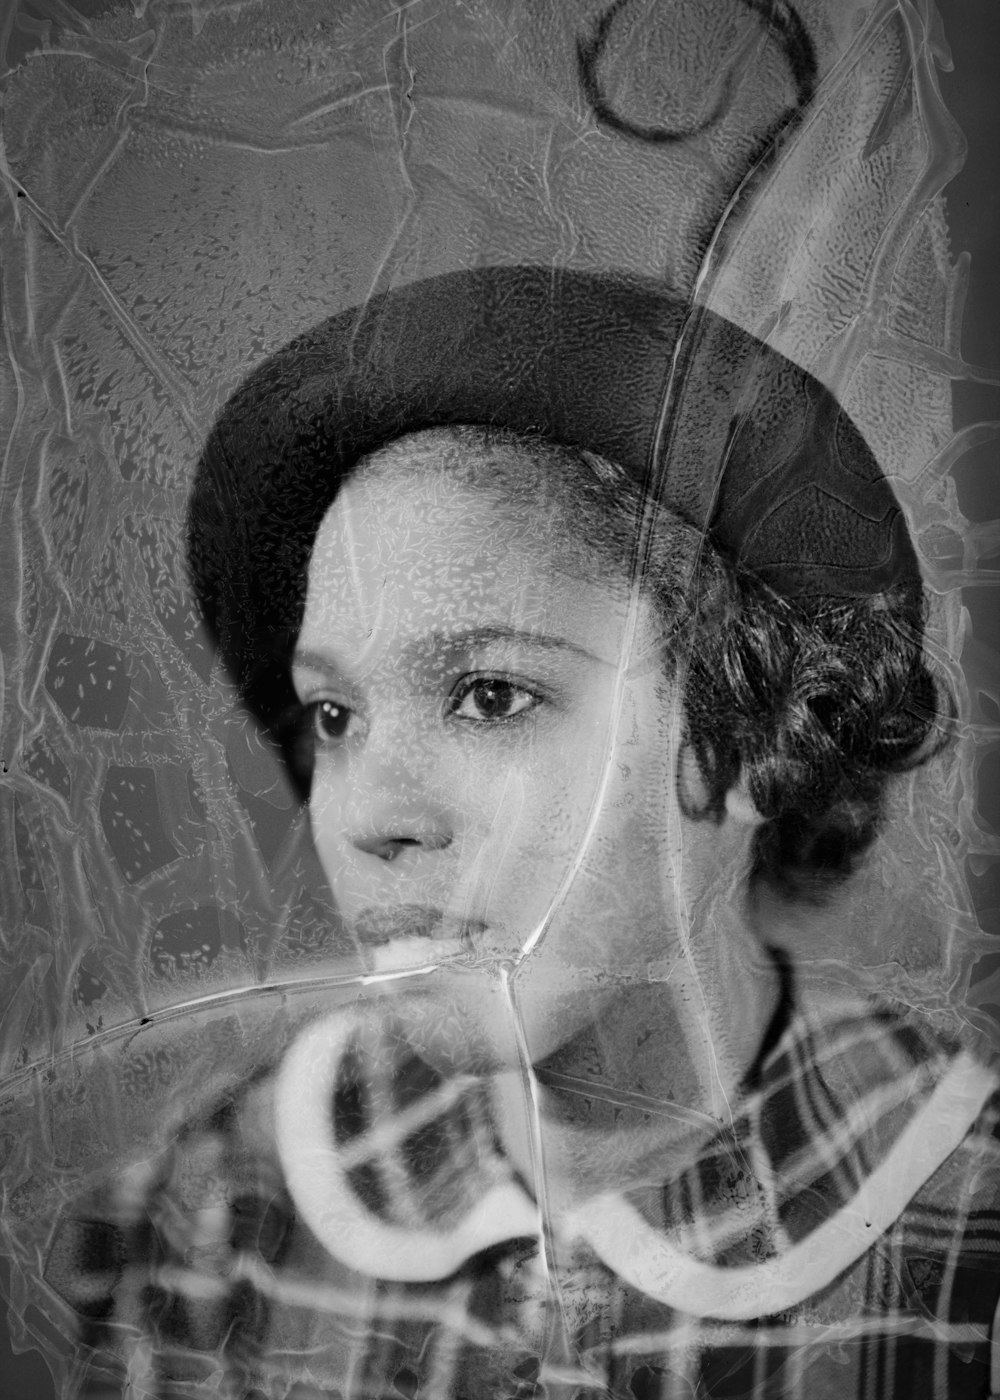 a black and white photo of a woman wearing a hat